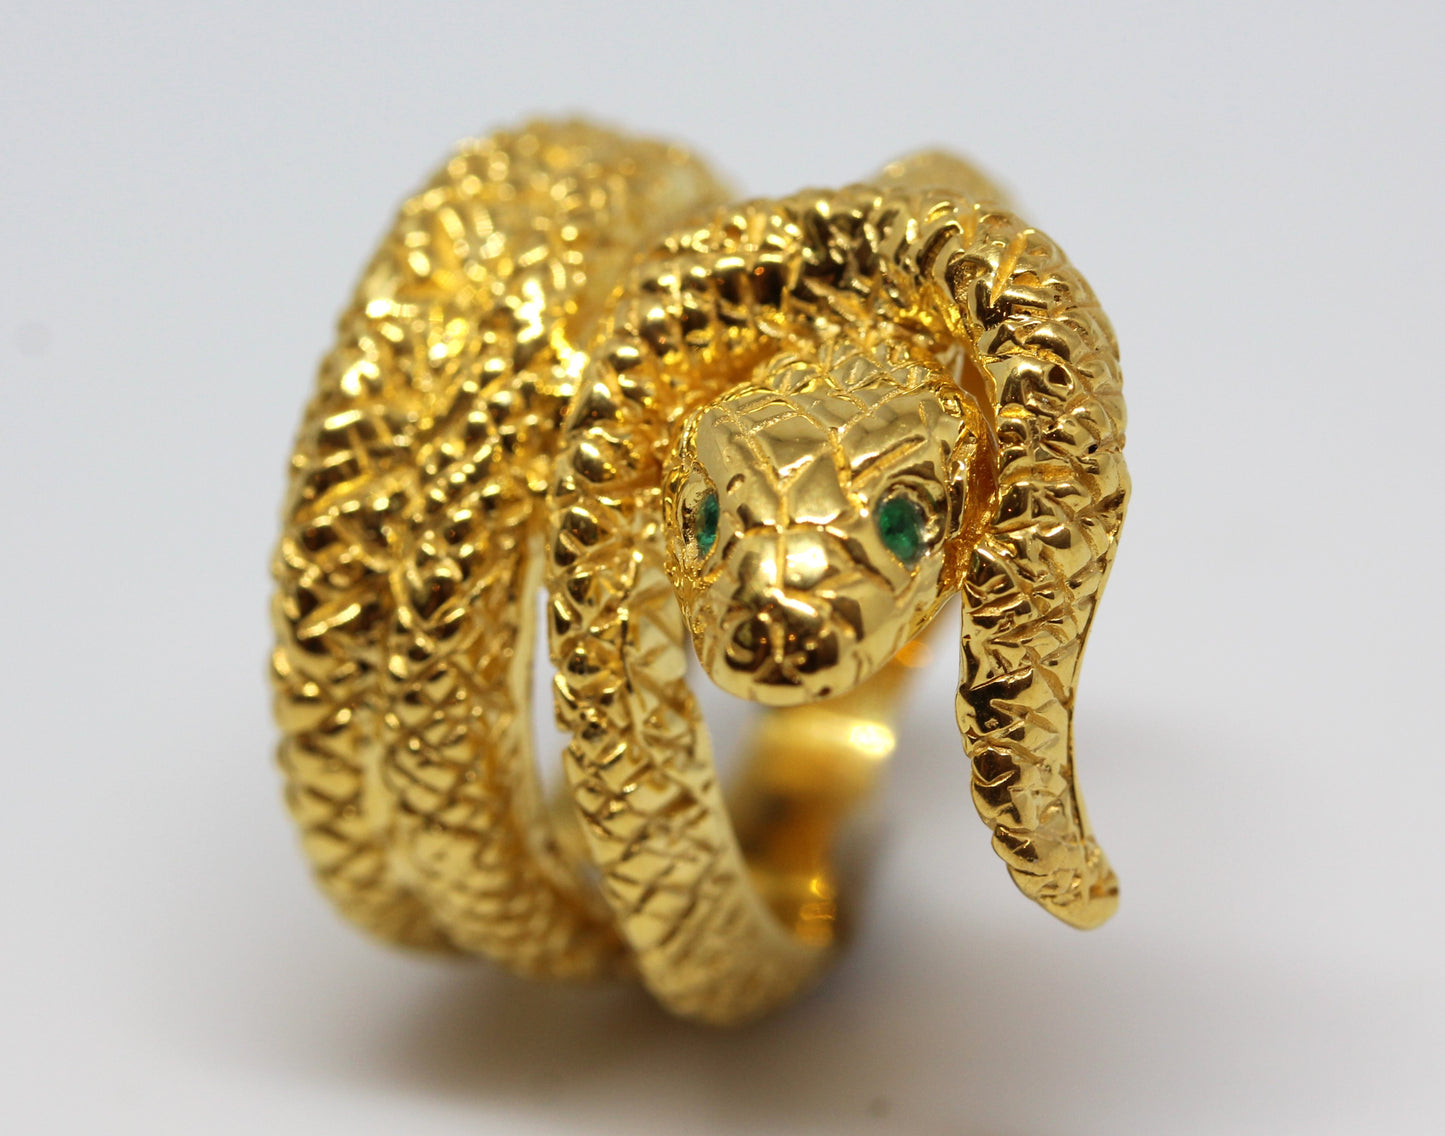 Snake Ring with Emerald Eyes 24k Yellow Gold Vermeil #327